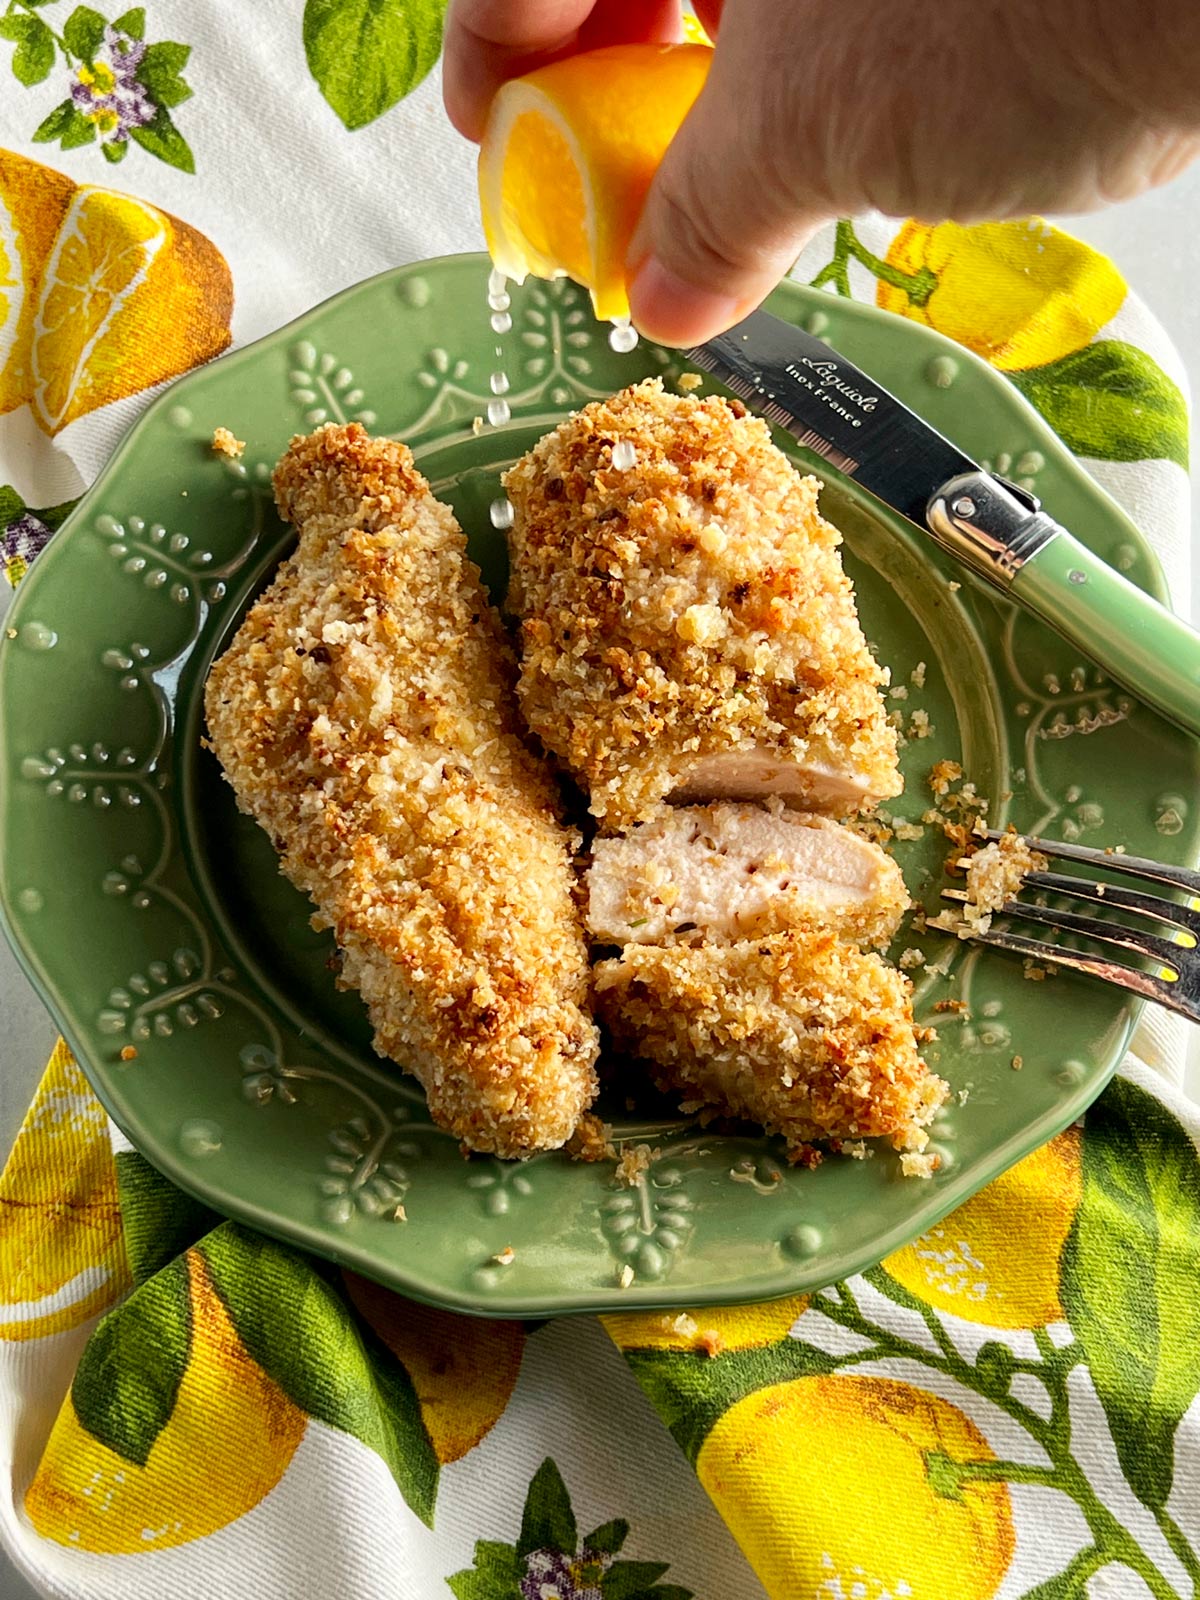 Baked breaded lemon chicken on a green plate with a hand sprinkling lemon on it.